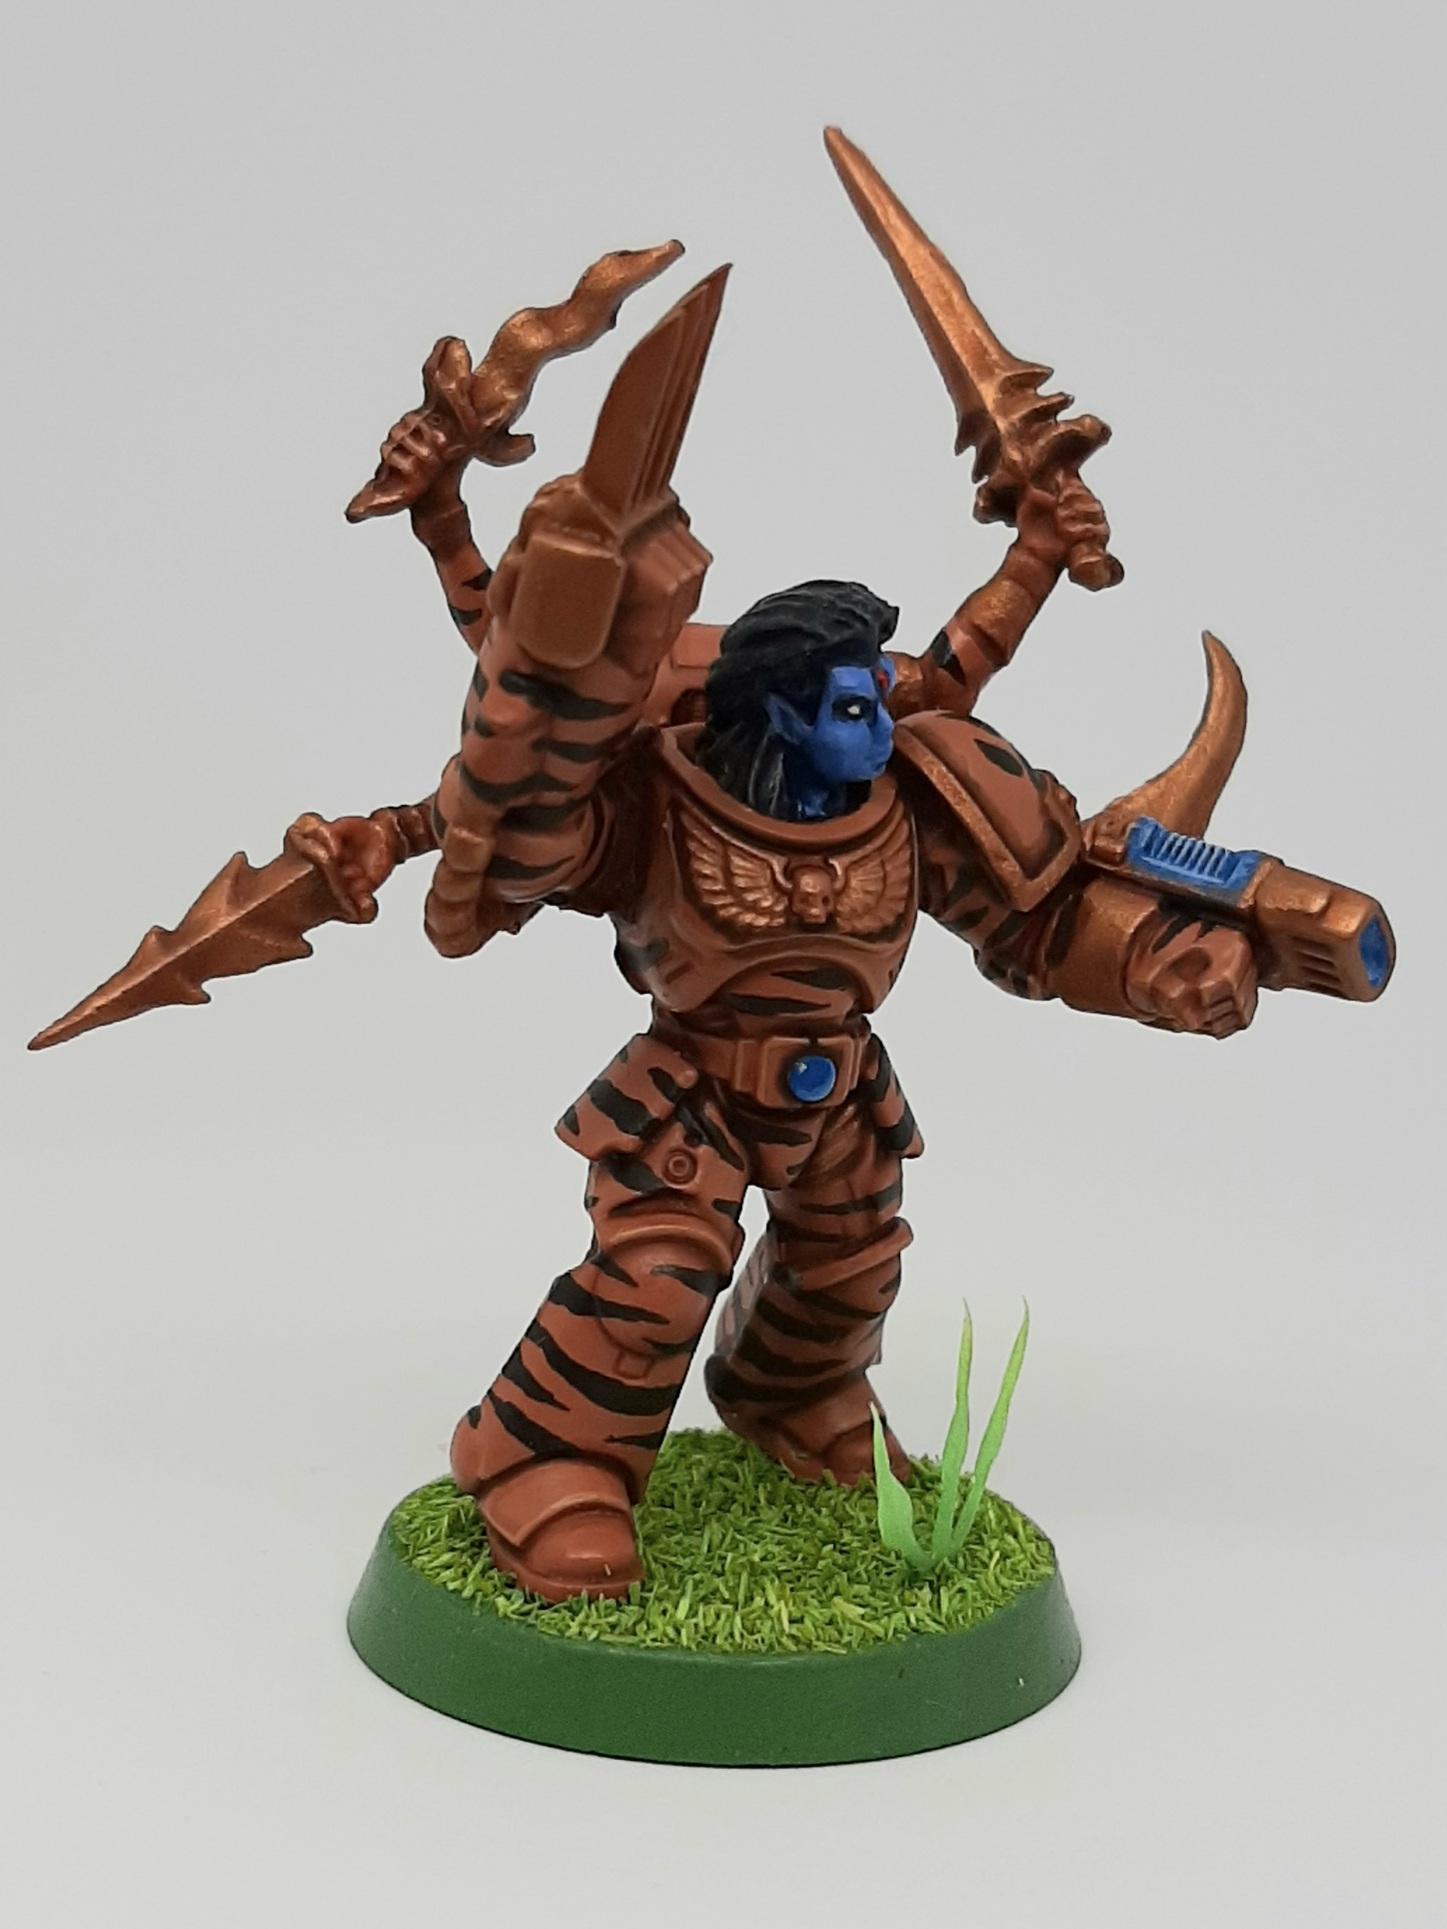 30k, Arms, Blades, Blue, Camouflage, Chapter, Character, Claw, Claws, Conversion, Custom, Dagger, Fighting, Forest, Gem, Gun, India, Jungle, Knife, Kris, Leader, Lightning, Maharaja, Master, Mounted, Nagordarika, Pistol, Plasma, Power, Primaris, Searing, Shiva, Six, Skin, Space, Space Marines, Special, Stripes, Tiger, Tigers, Veda, Vedic, Warhammer 40,000, Warhammer Fantasy, Weapon